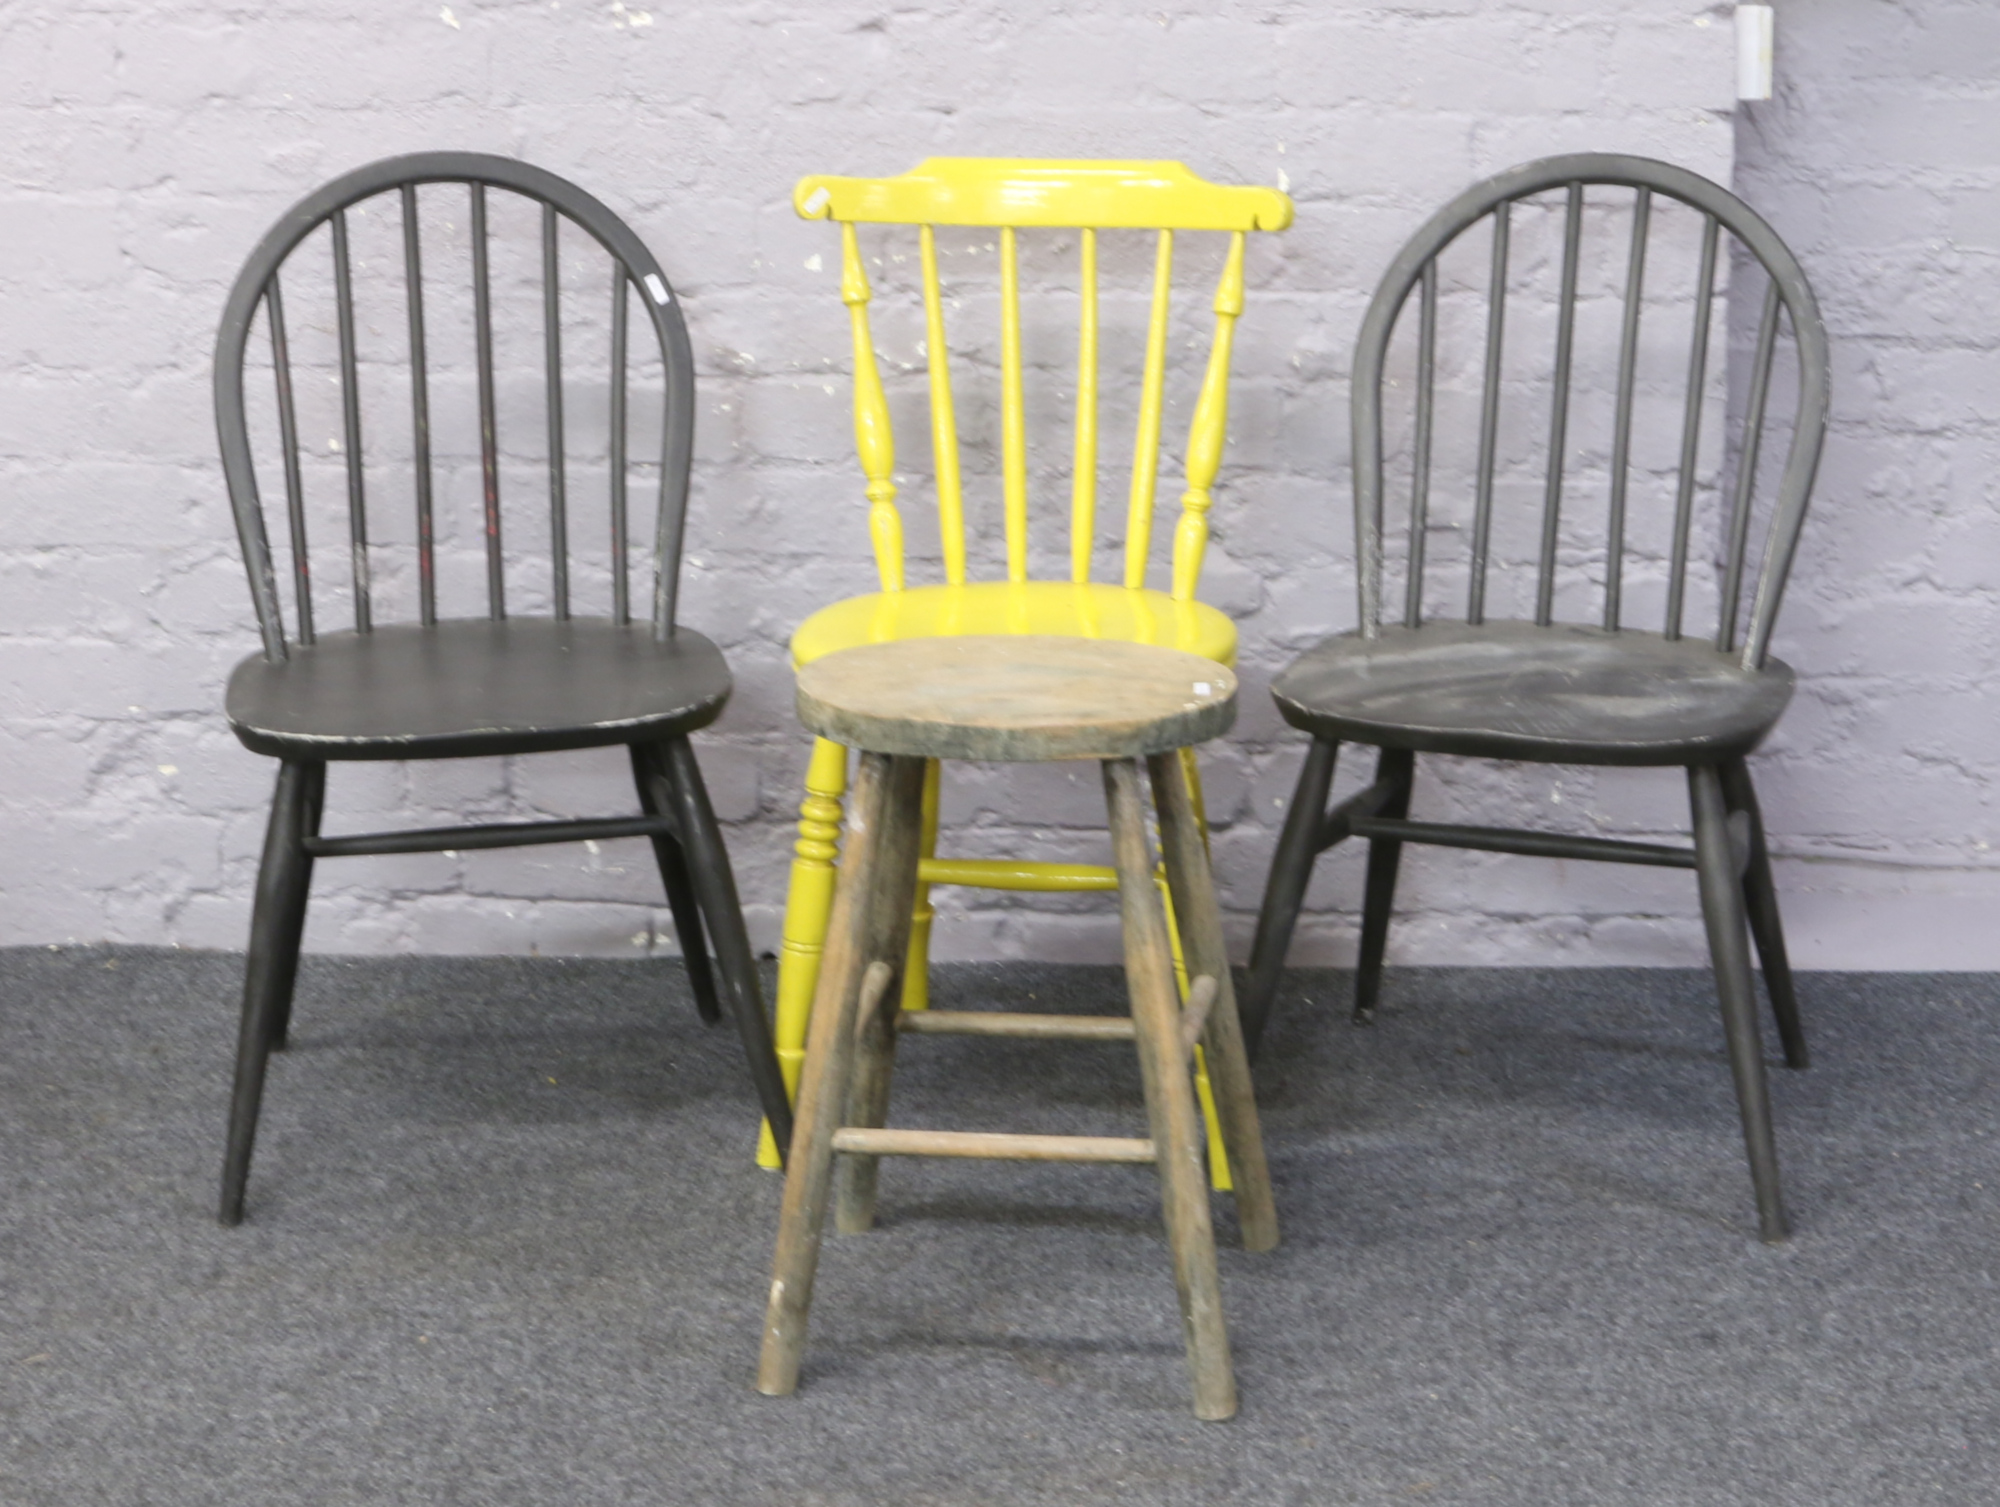 Three painted kitchen chairs and a stool.